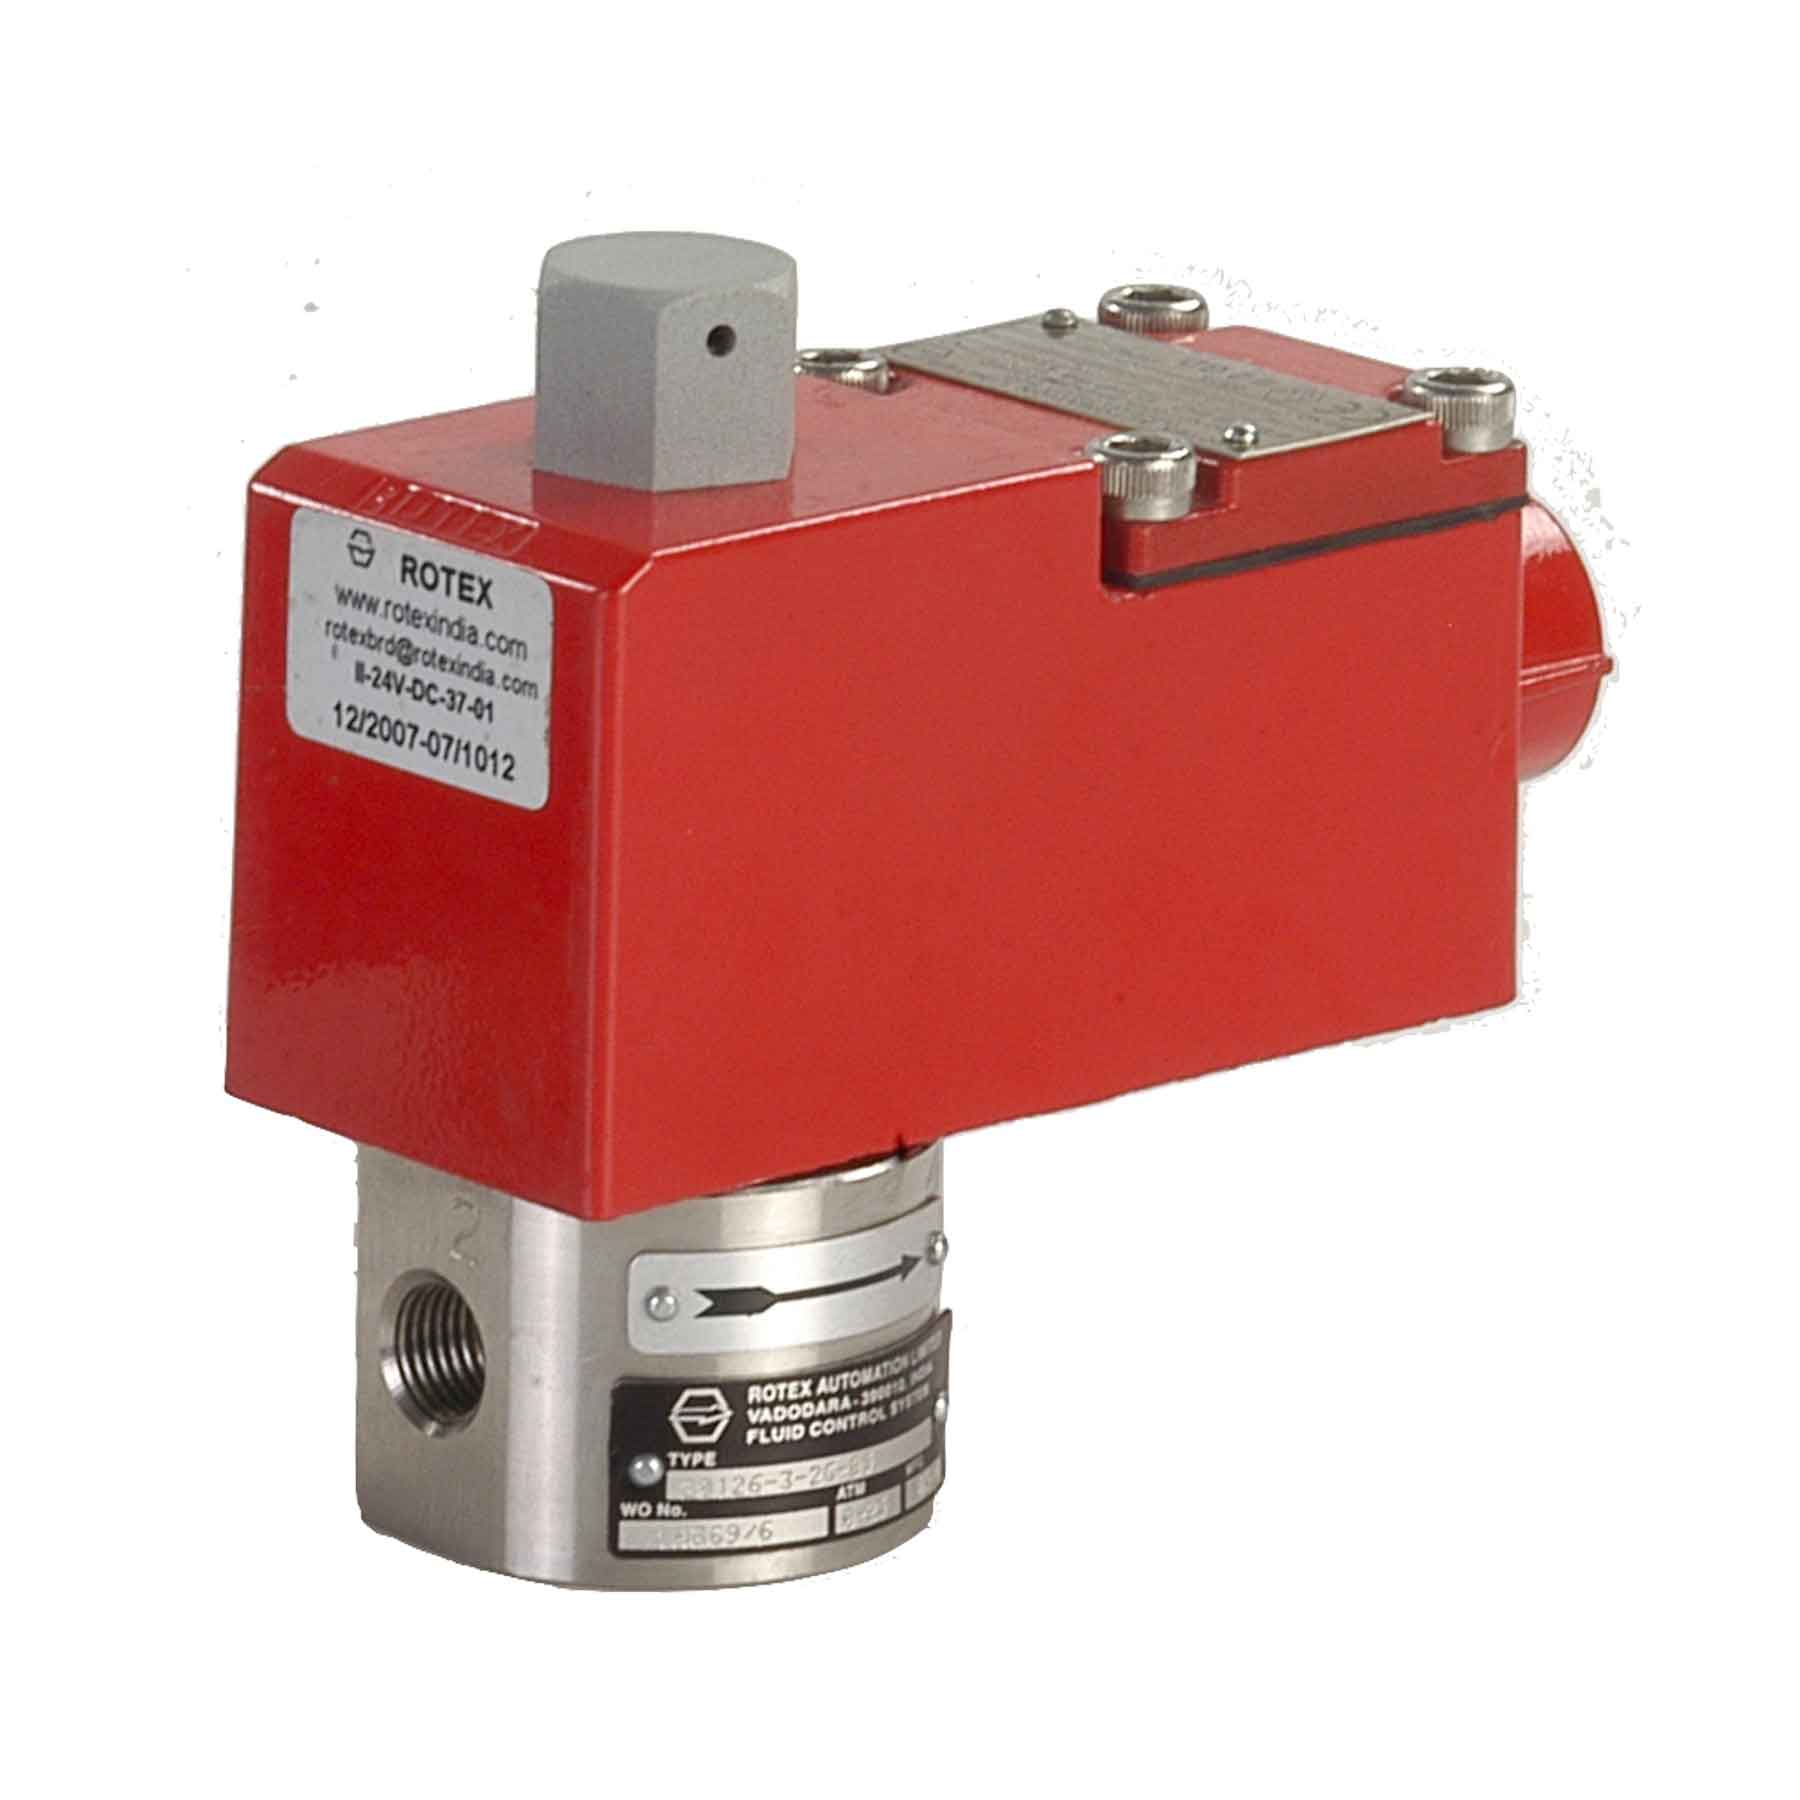 Rotex 3/2-Way Normally Closed Direct Lift Solenoid Valve 30125-2.2-2G-B5+I-230V-50HZ-22-H-CE